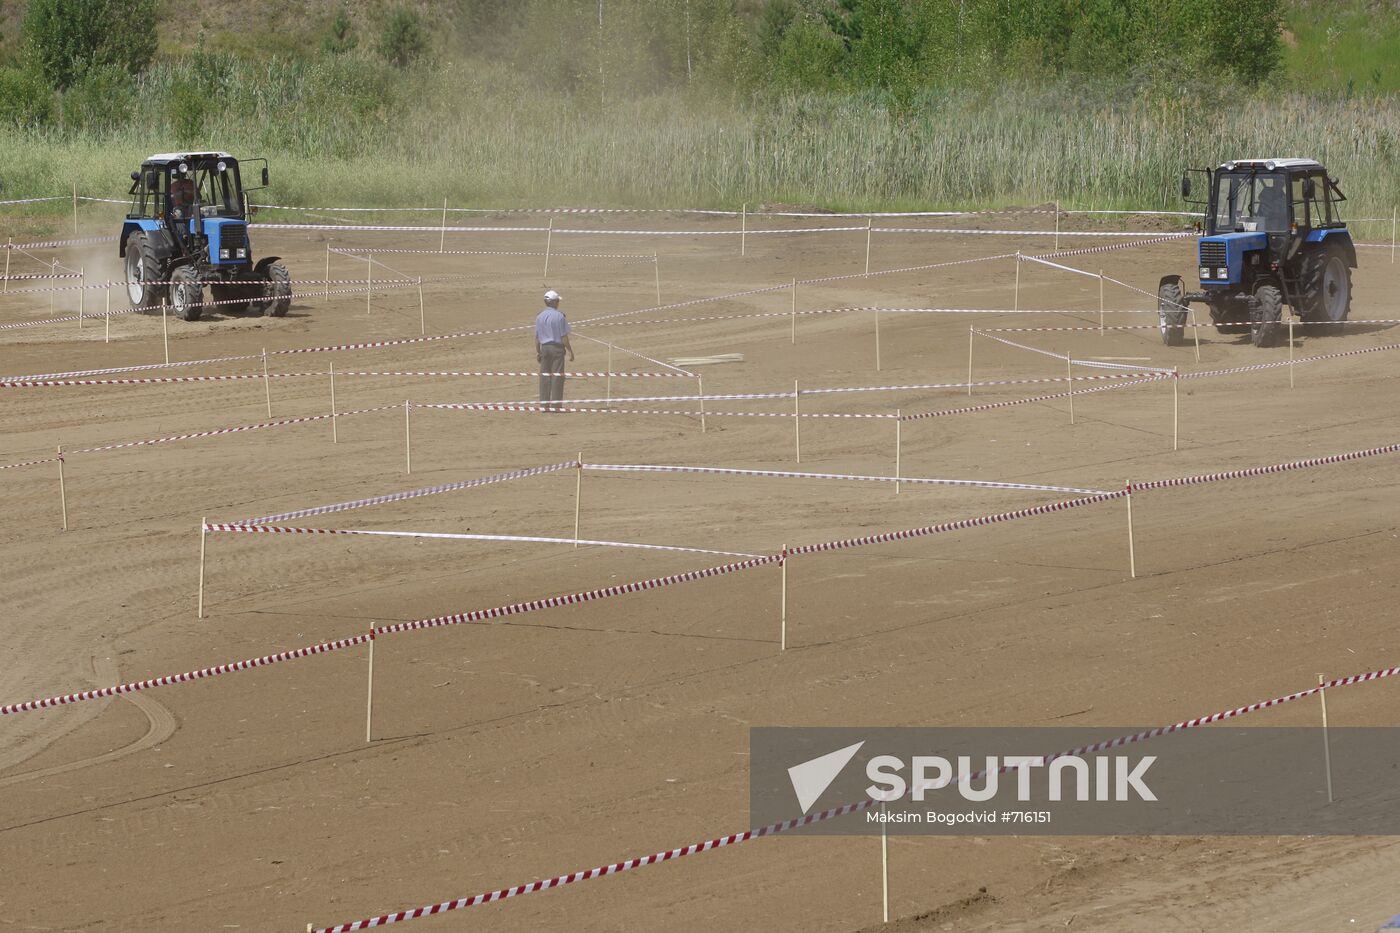 Tractor drivers compete on tractordrome